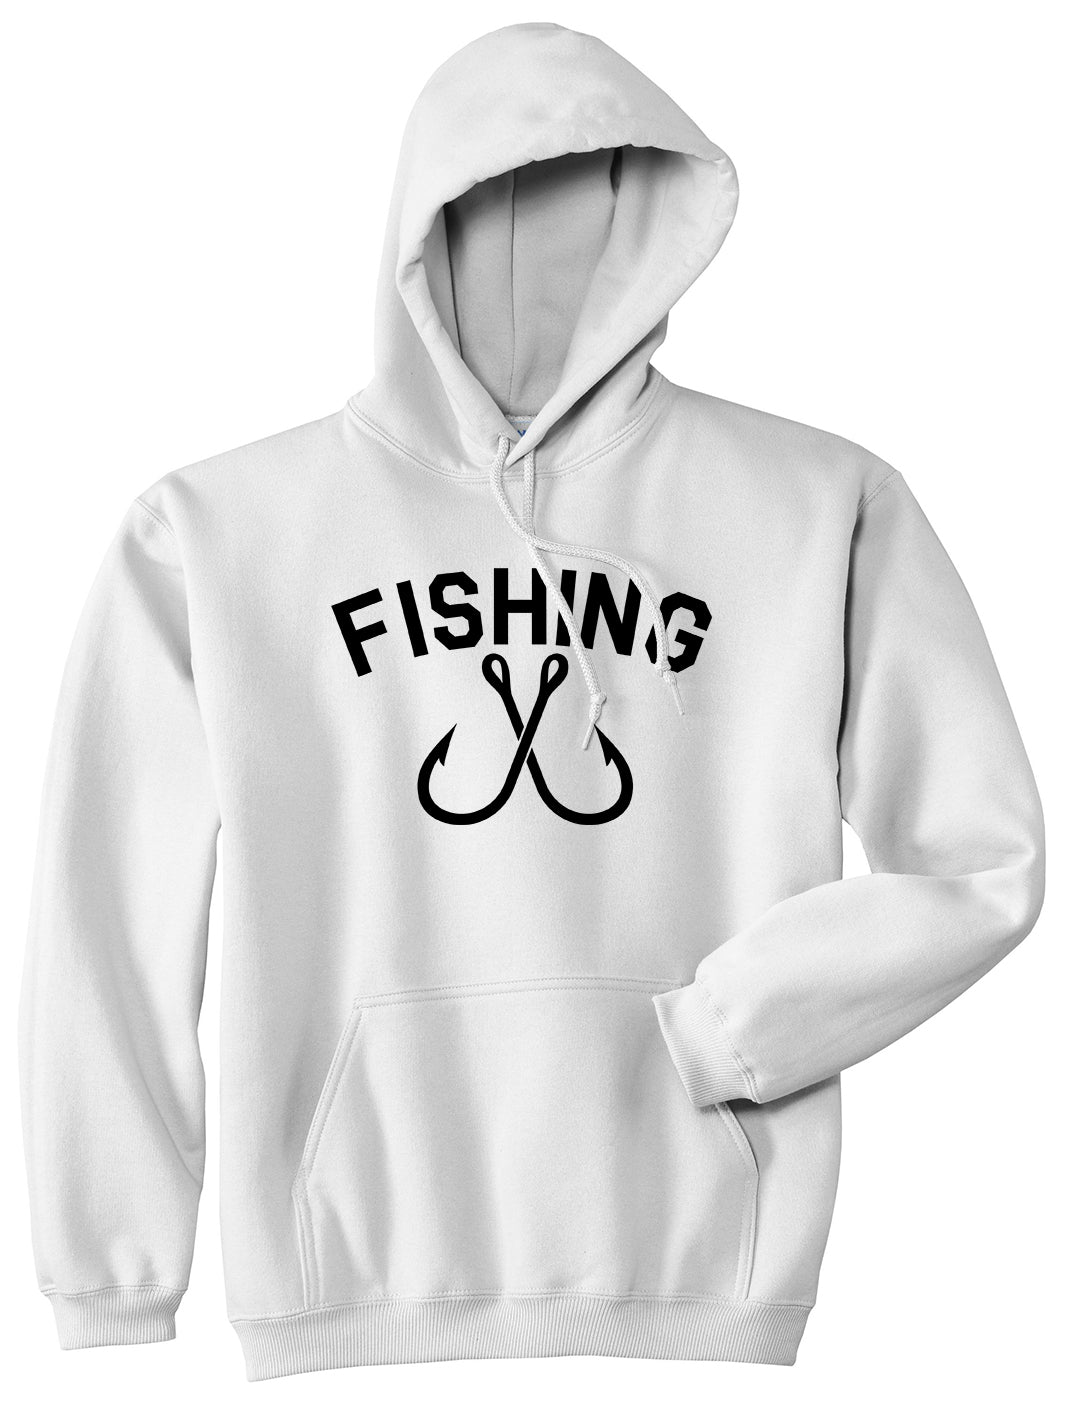 Fishing Hook Logo Mens Pullover Hoodie by Kings of Ny. White / XXX-Large